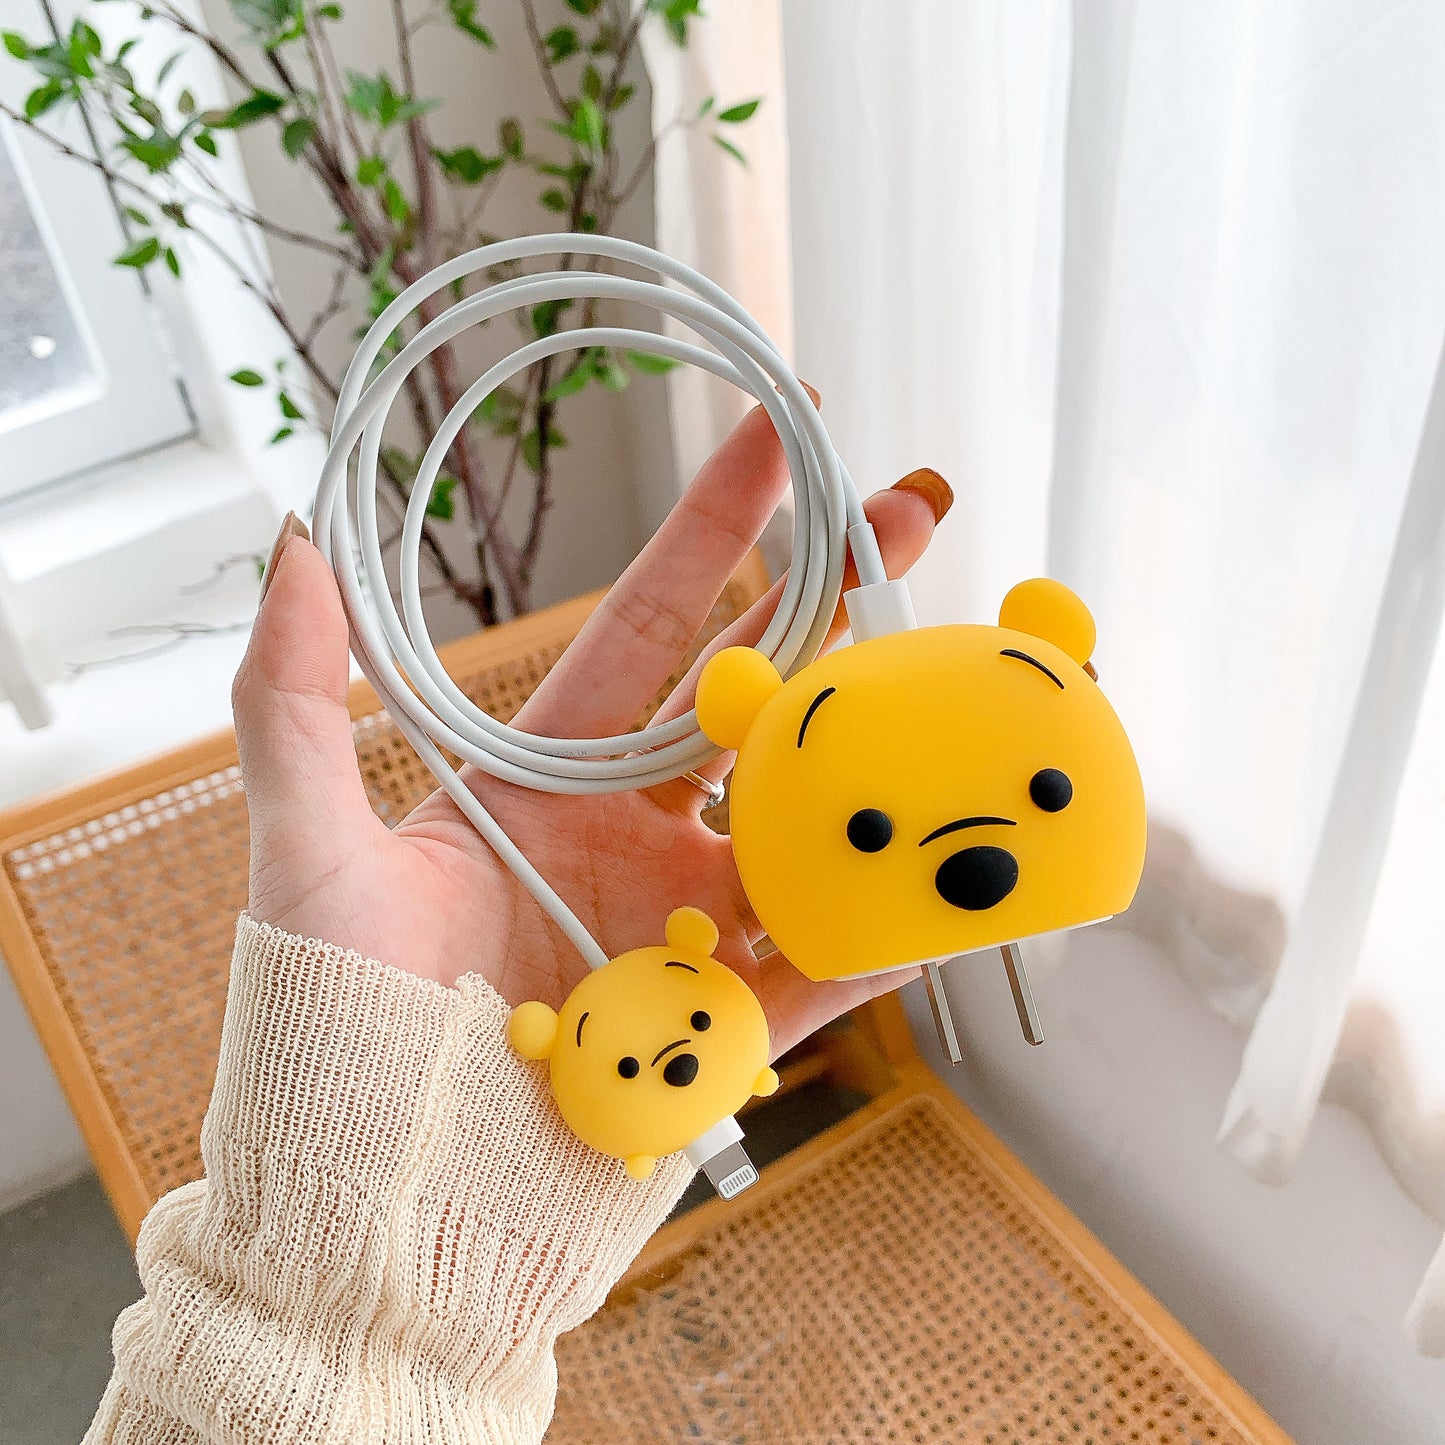 POOH Silicon Apple iPhone Charger Case | Lightning Charger/Cable Protector Cover for iPhone Charger-Pooh